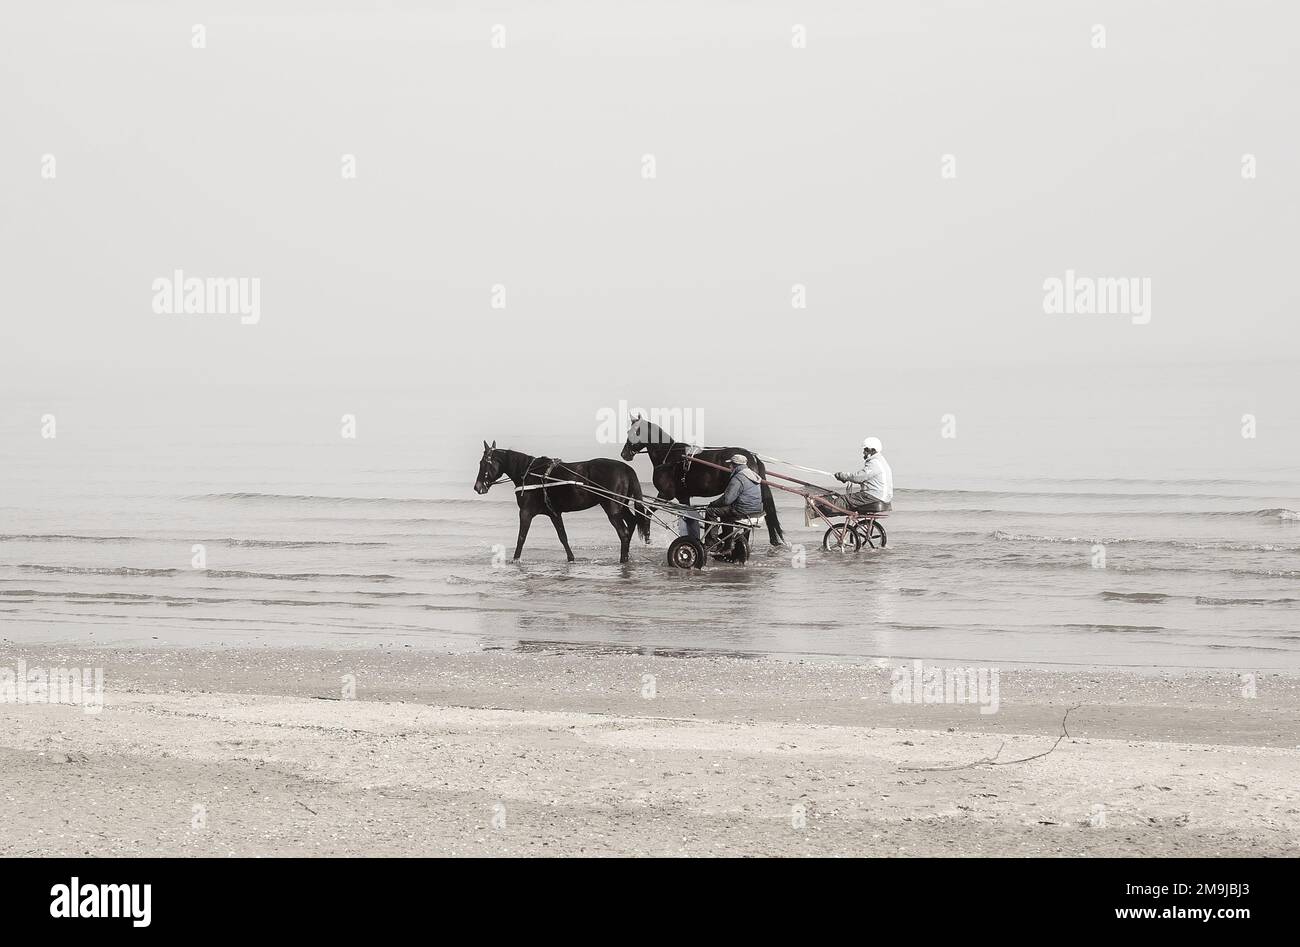 Two horse drivers on sulkies Stock Photo